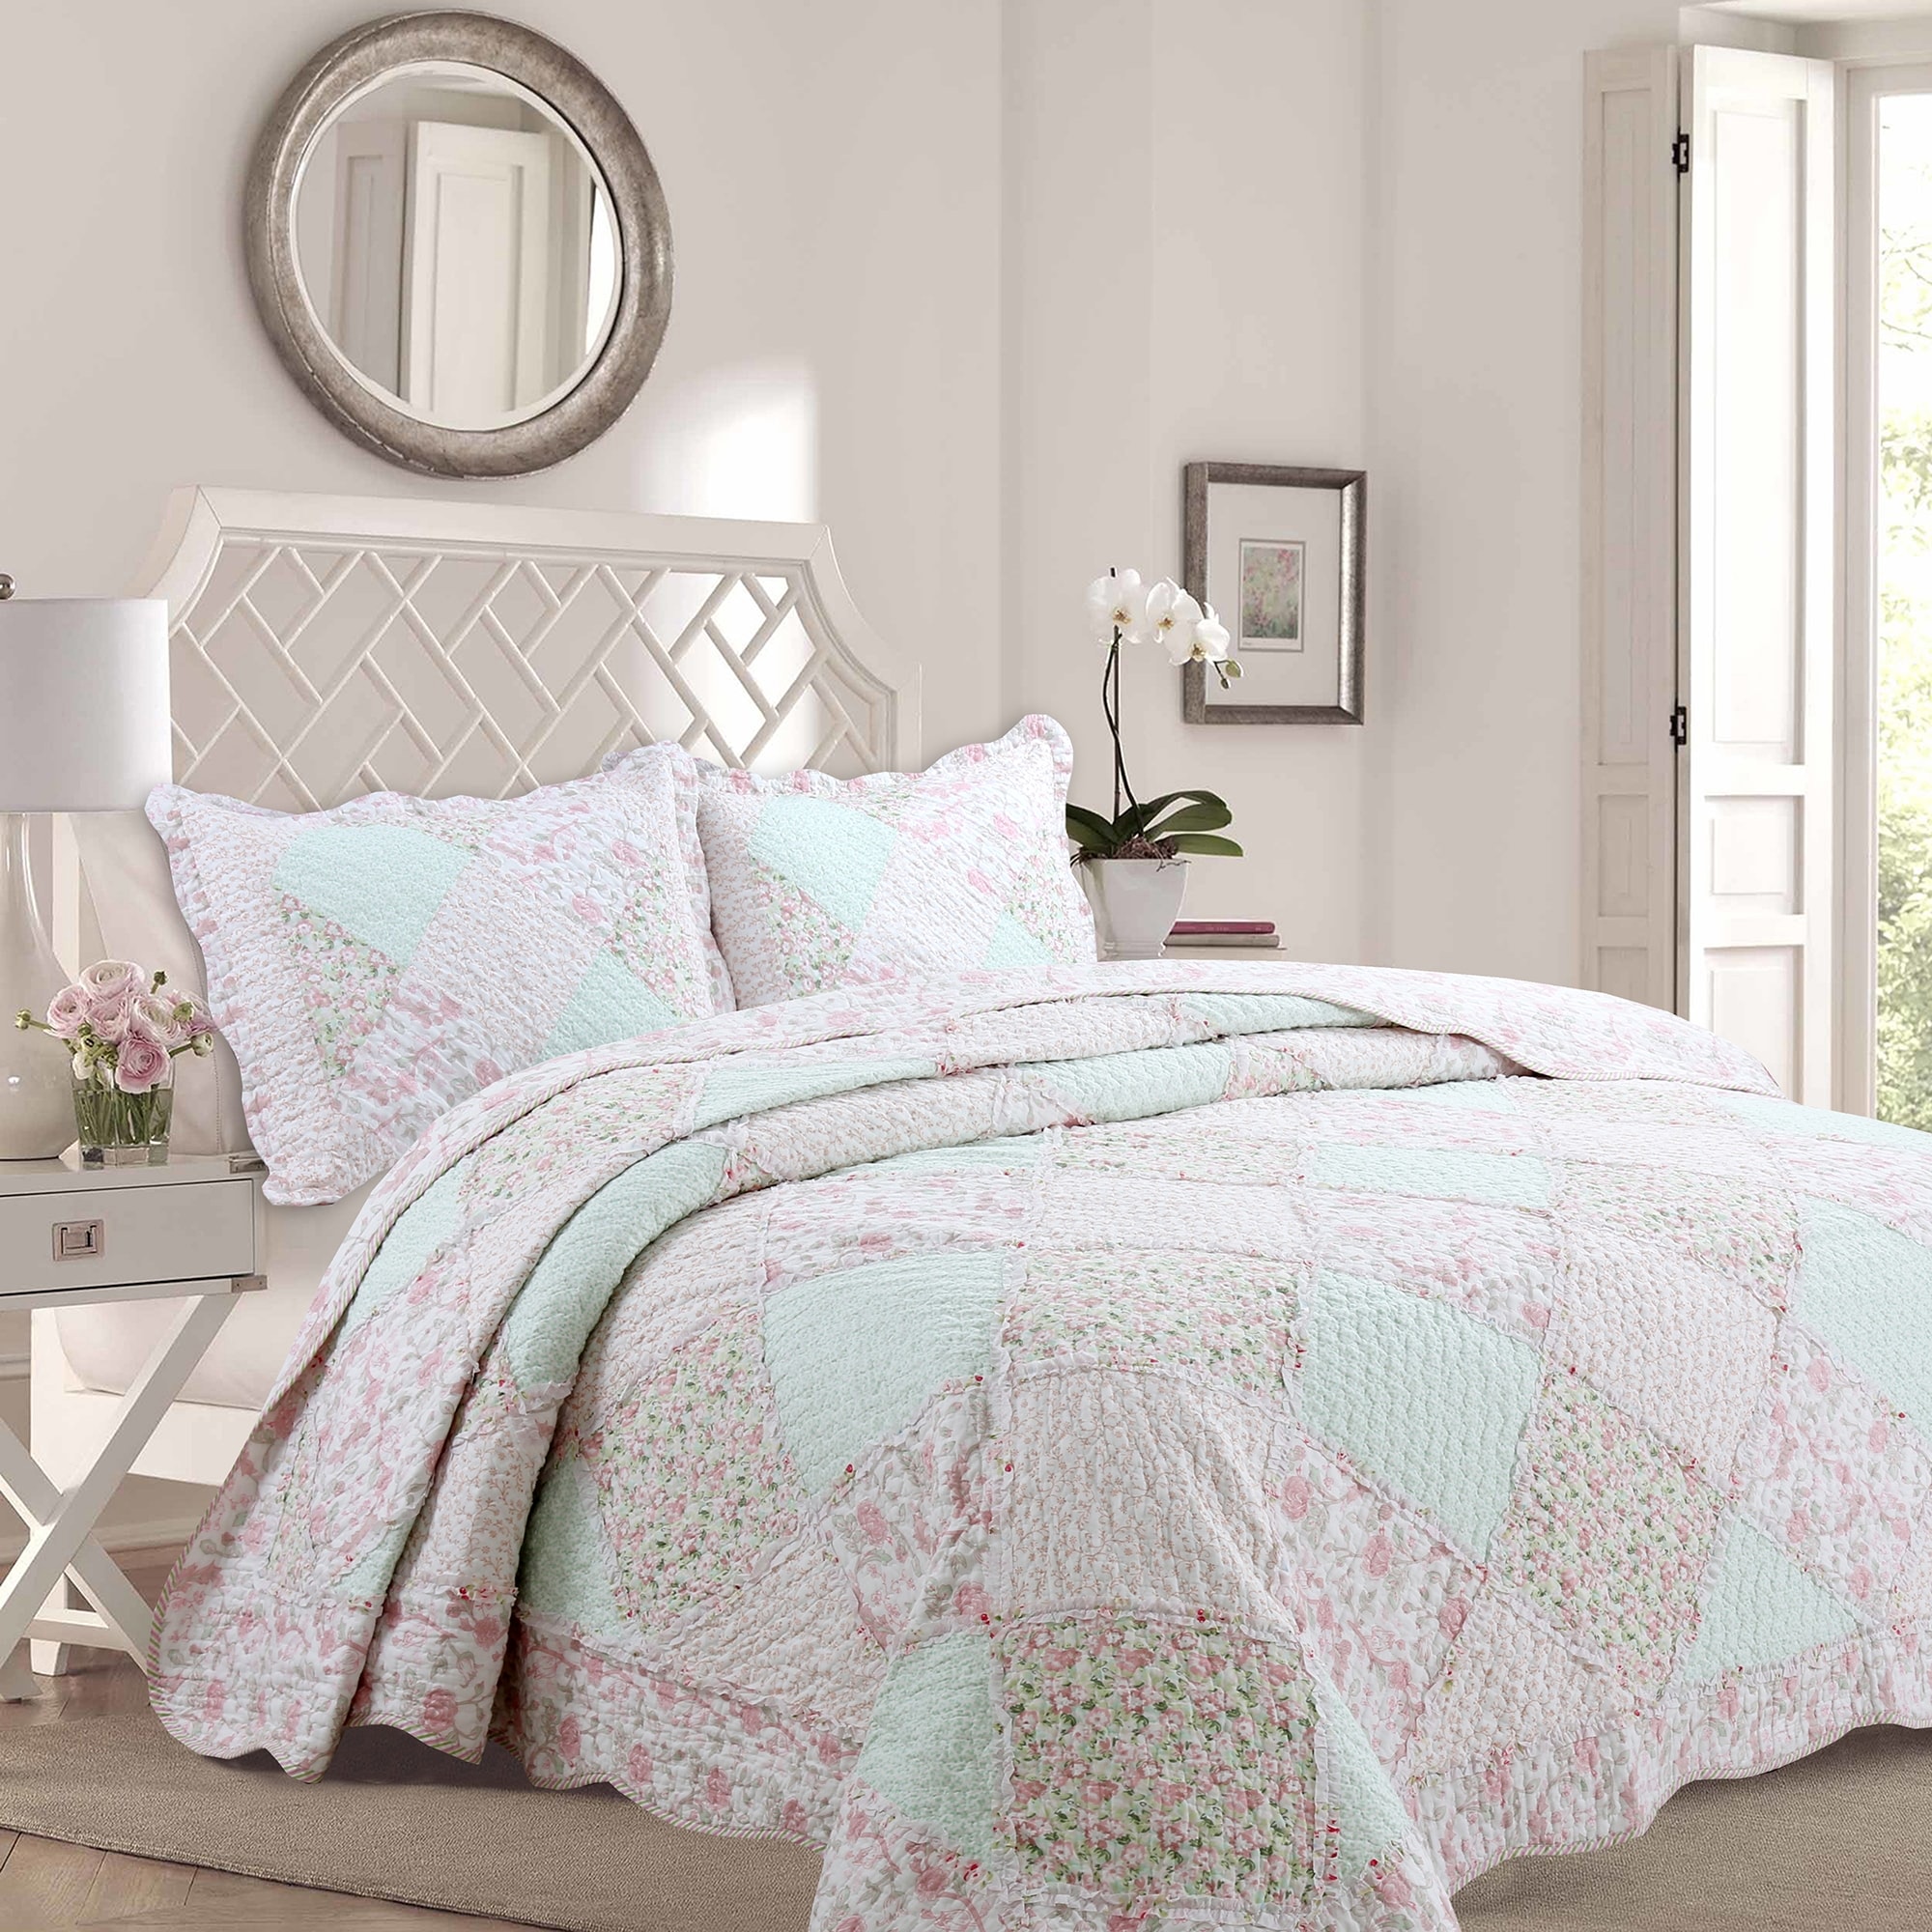 BEAUTIFUL CHIC COTTAGE FRENCH COUNTRY BLUE LEAF IVORY WHITE LACE COMFORTER SET 